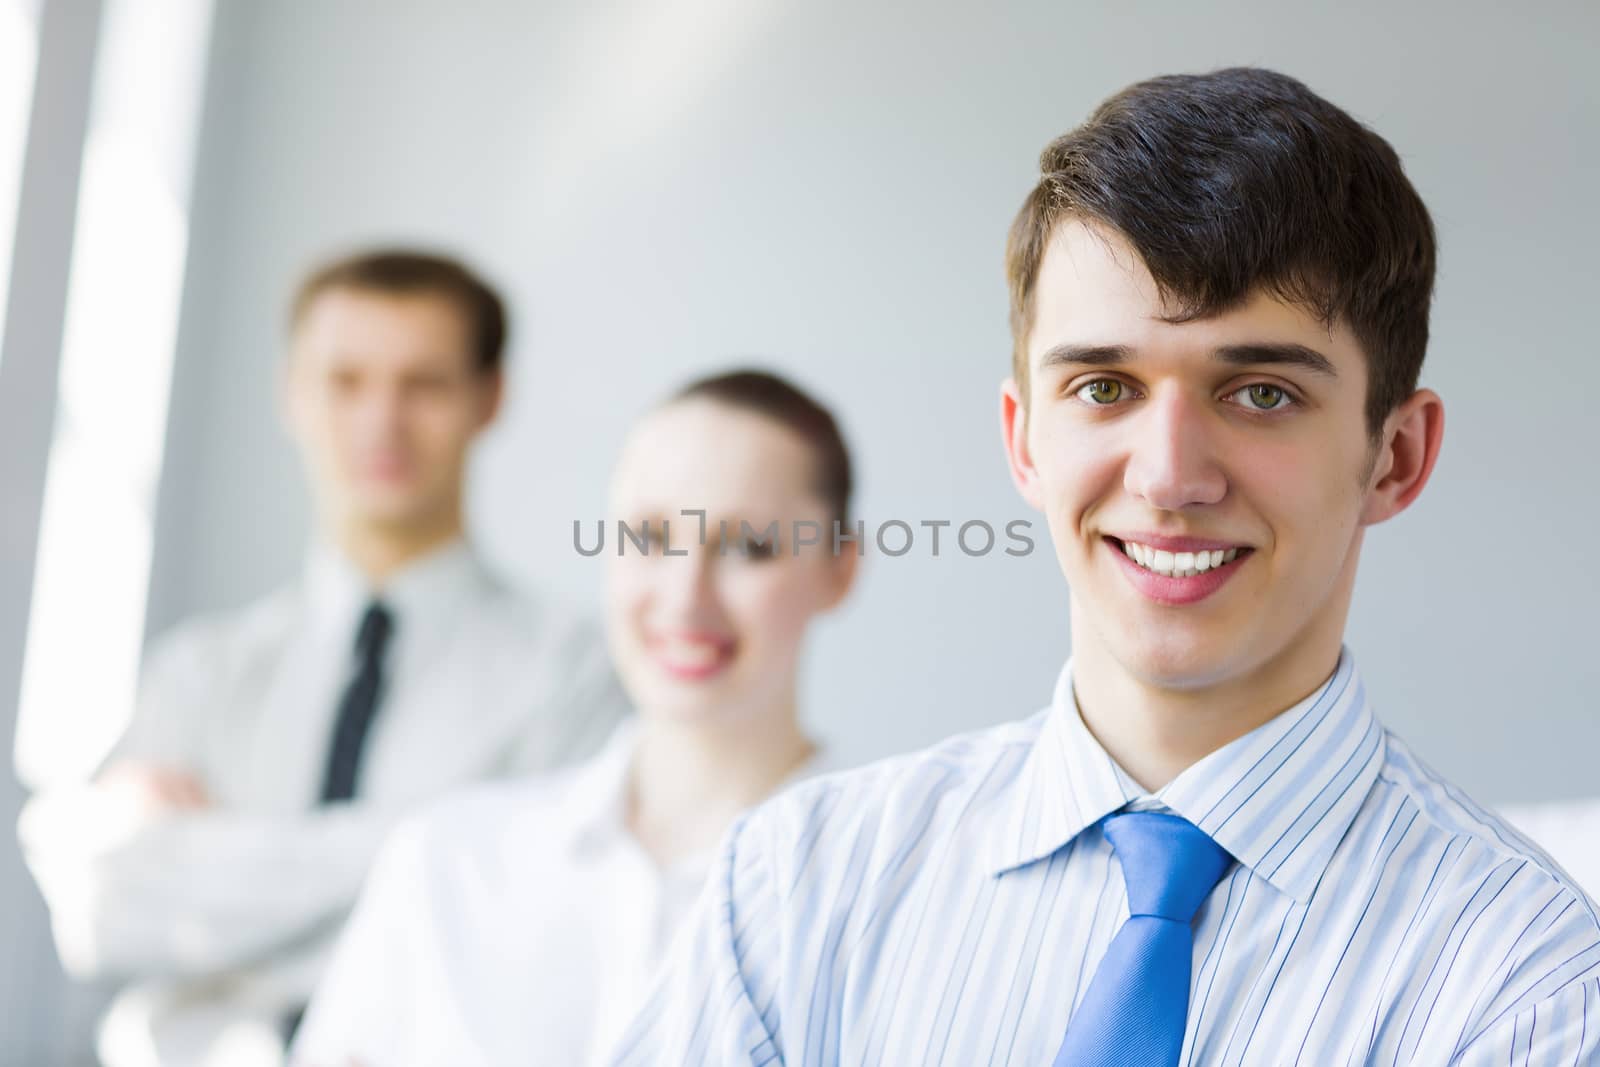 Smiling successful businessman with colleagues at background